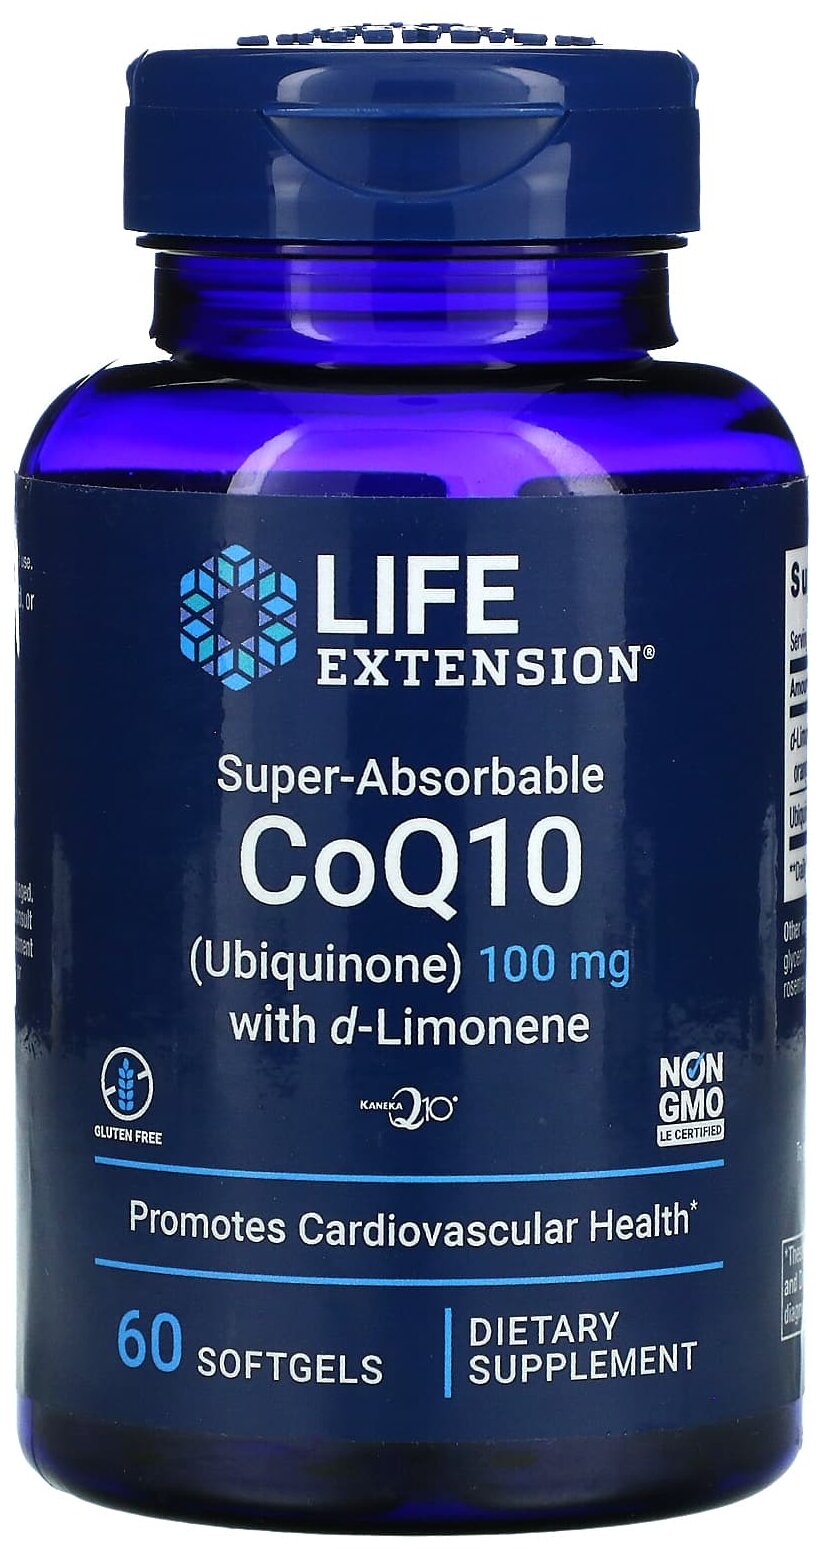 Капсулы Life Extension Super-Absorbable CoQ10 100 мг with d-Limonene, 160 г, 100 мг, 60 шт.